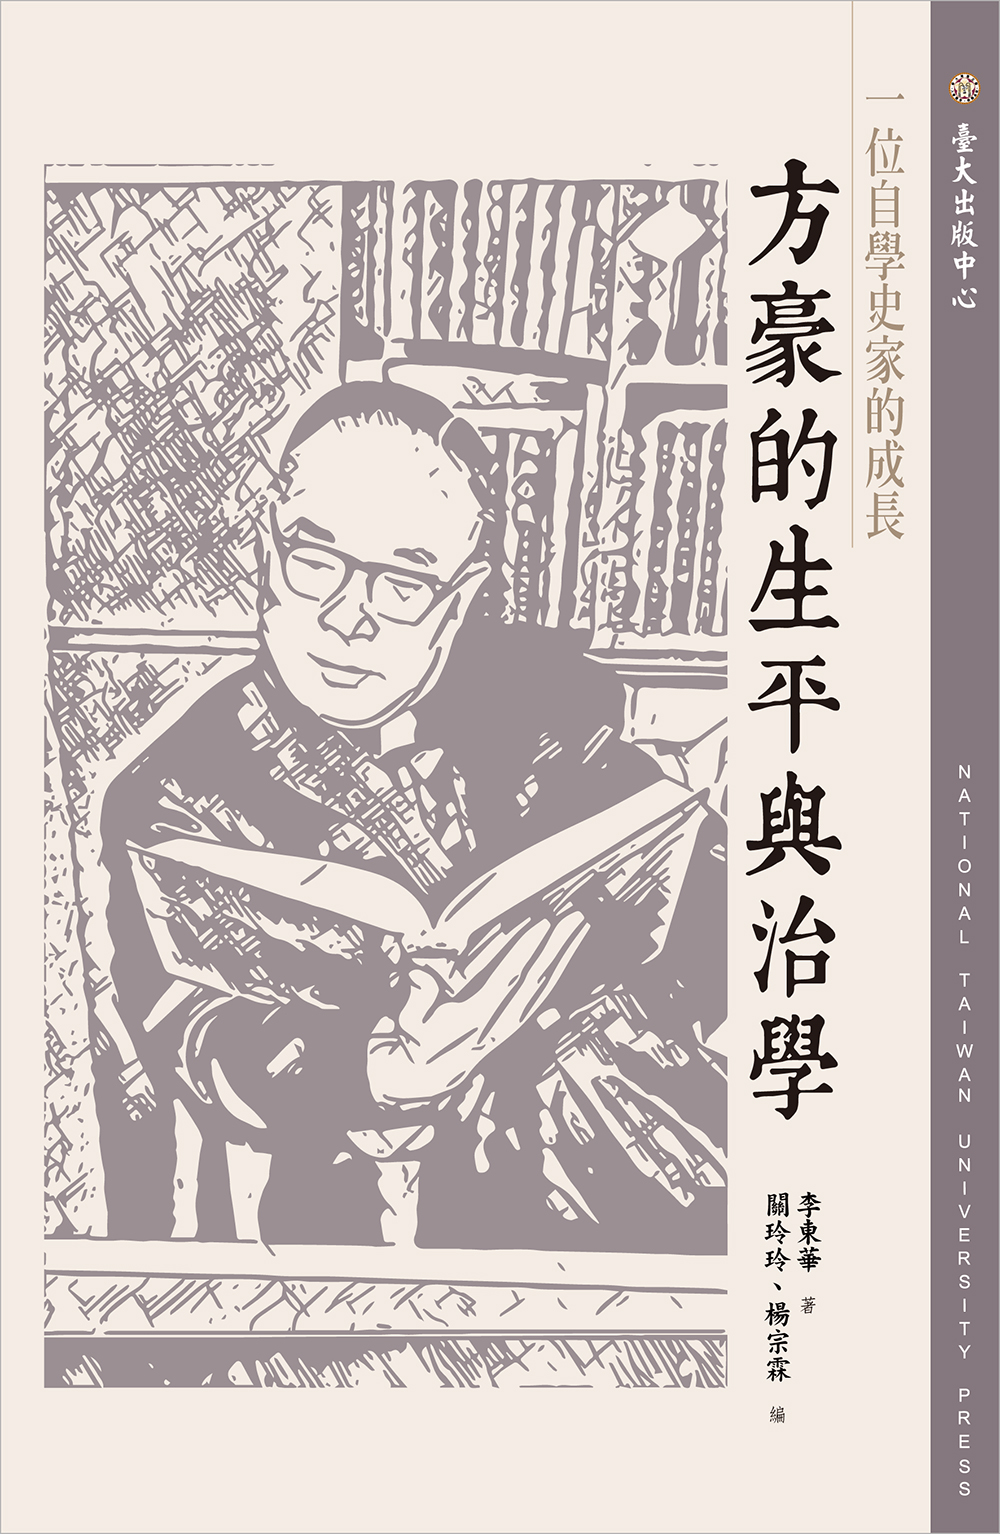 A Self-educated Historian: Fang Hao's Life and His Research Overview